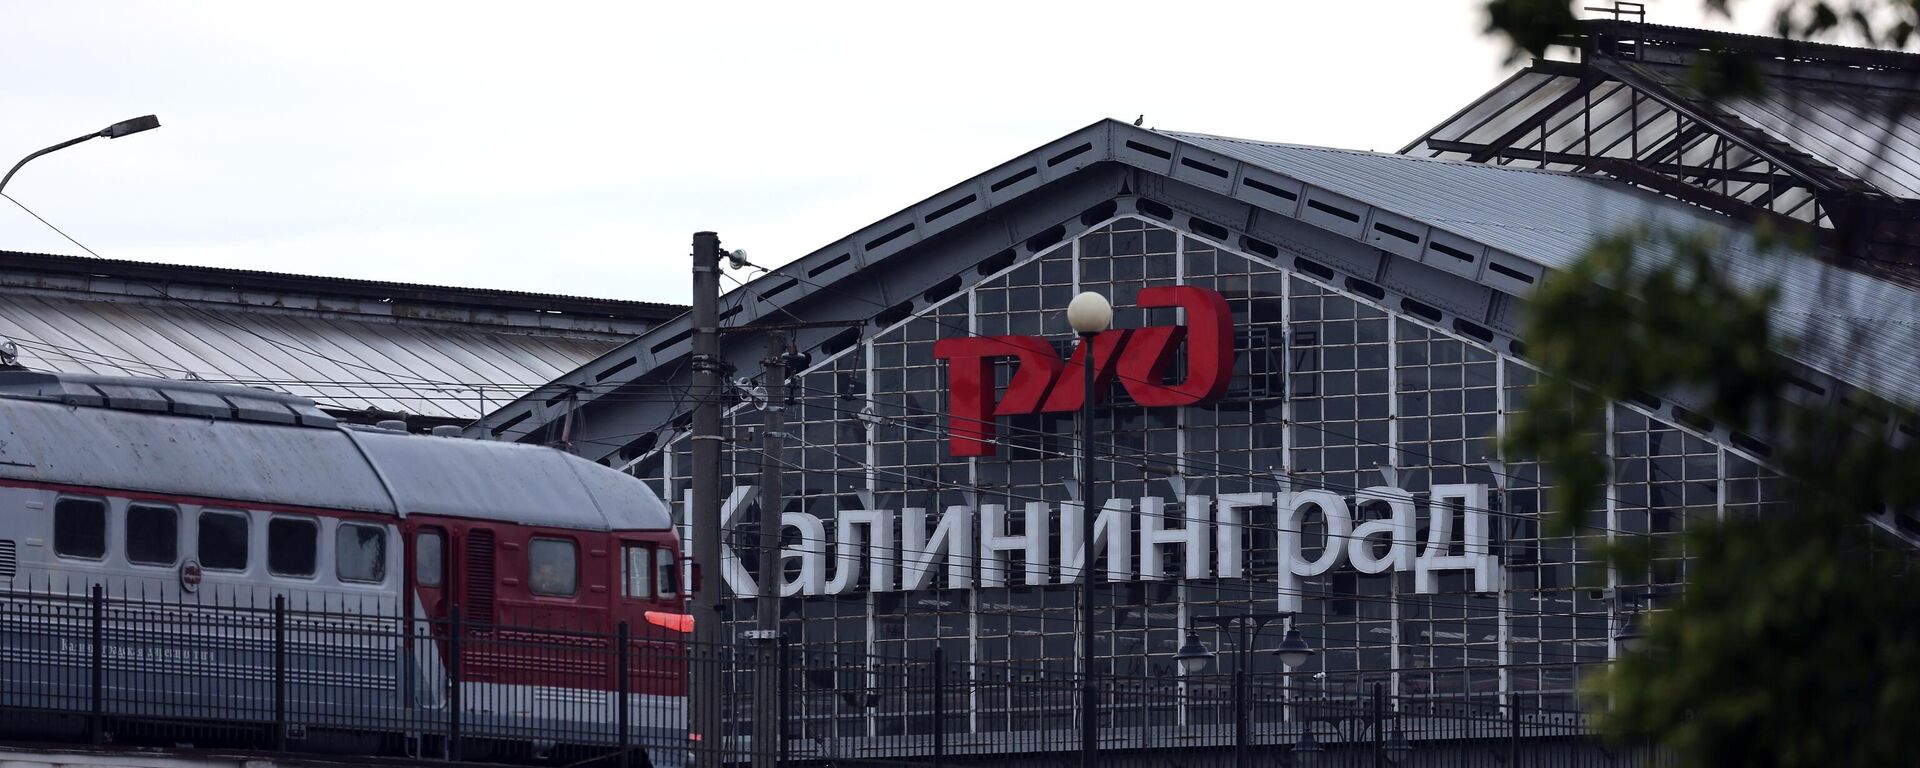 The logo of the Rassian Railways and inscription Kaliningrad are seen on the roof gable of the railway station in Kaliningrad, Russia. Lithuania says ban on rail cargo transit from Russia to Kaliningrad directed by EU. - Sputnik International, 1920, 01.07.2022